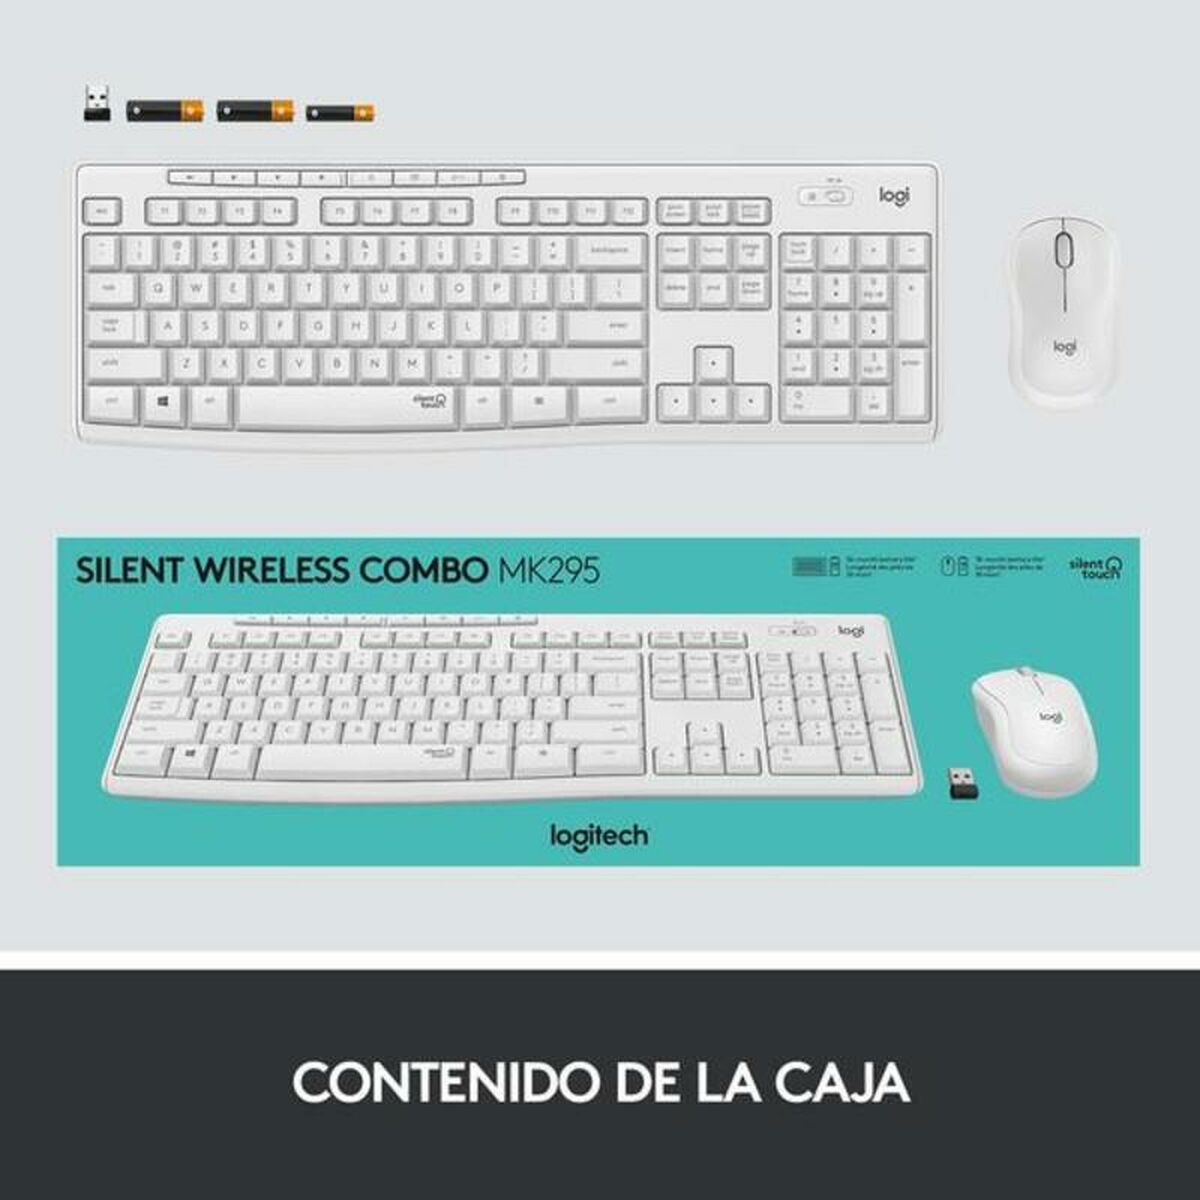 Keyboard and Mouse Logitech MK295 White Spanish Qwerty, Logitech, Computing, Accessories, keyboard-and-mouse-logitech-mk295-white-spanish-qwerty, :QWERTY, :Spanish, Brand_Logitech, category-reference-2609, category-reference-2642, category-reference-2646, category-reference-t-19685, category-reference-t-19908, category-reference-t-21353, computers / peripherals, Condition_NEW, hot deals, office, Price_50 - 100, Teleworking, RiotNook